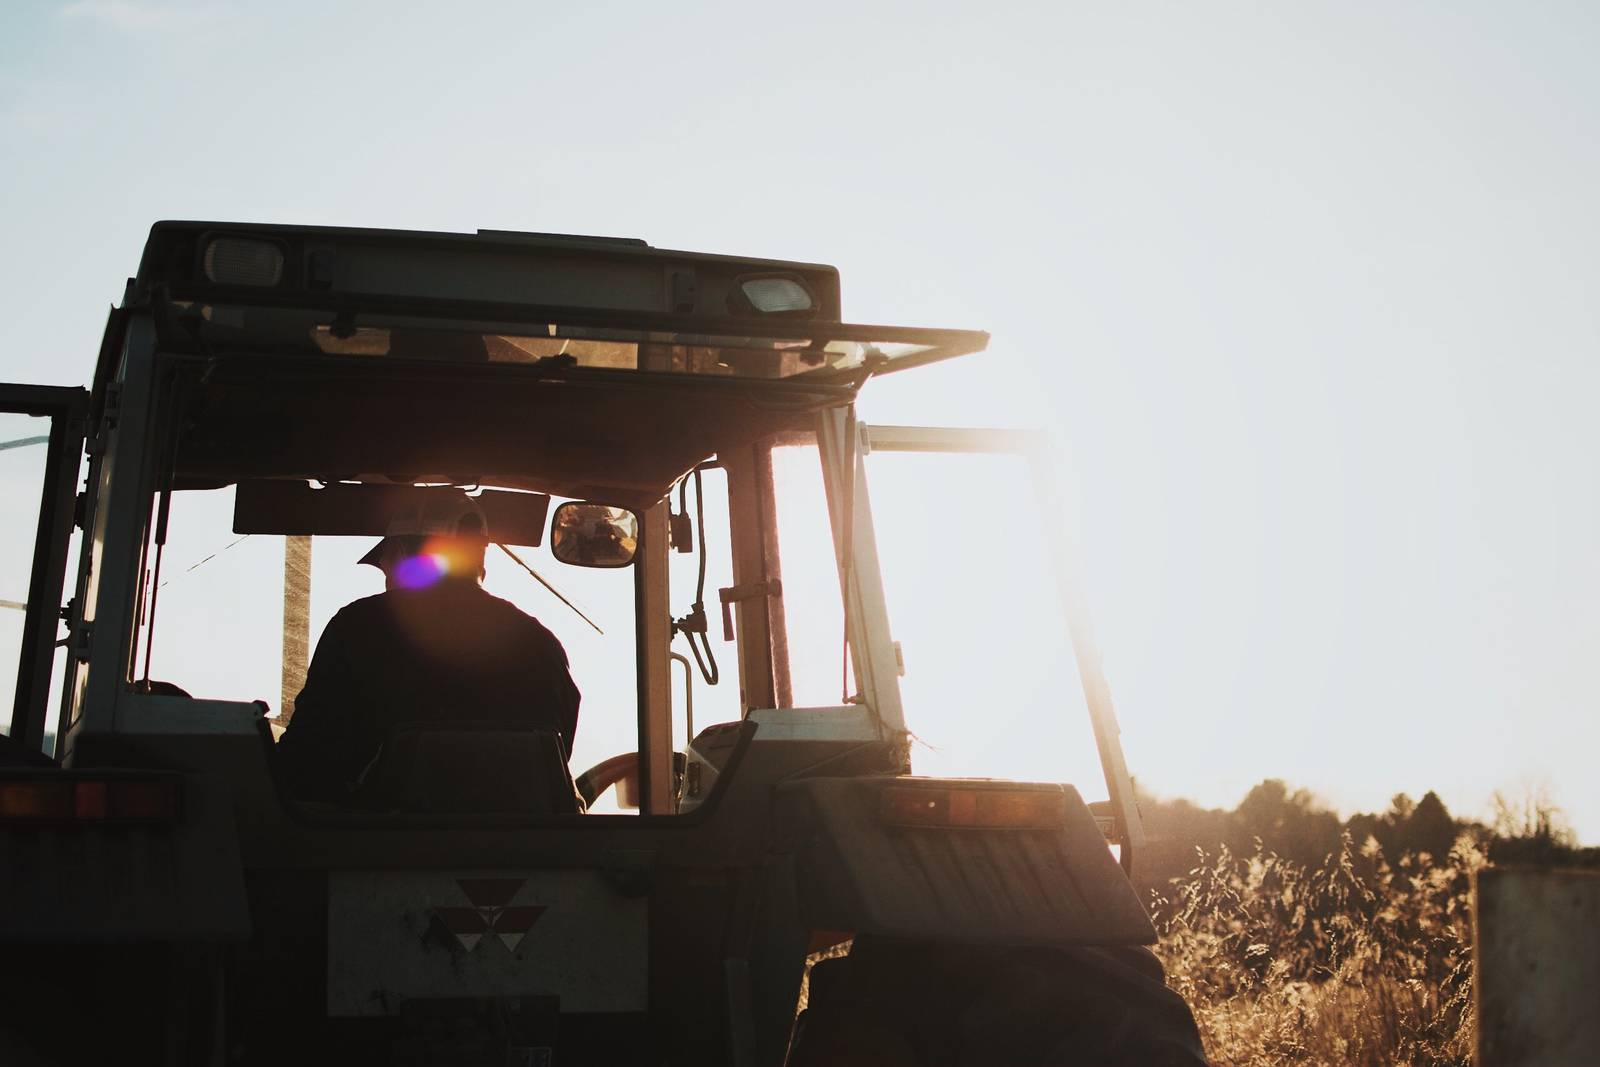 Proximity warnings are alerts for when farmers are using machinery. Photograph: Spencer Scott Pugh on Unsplash